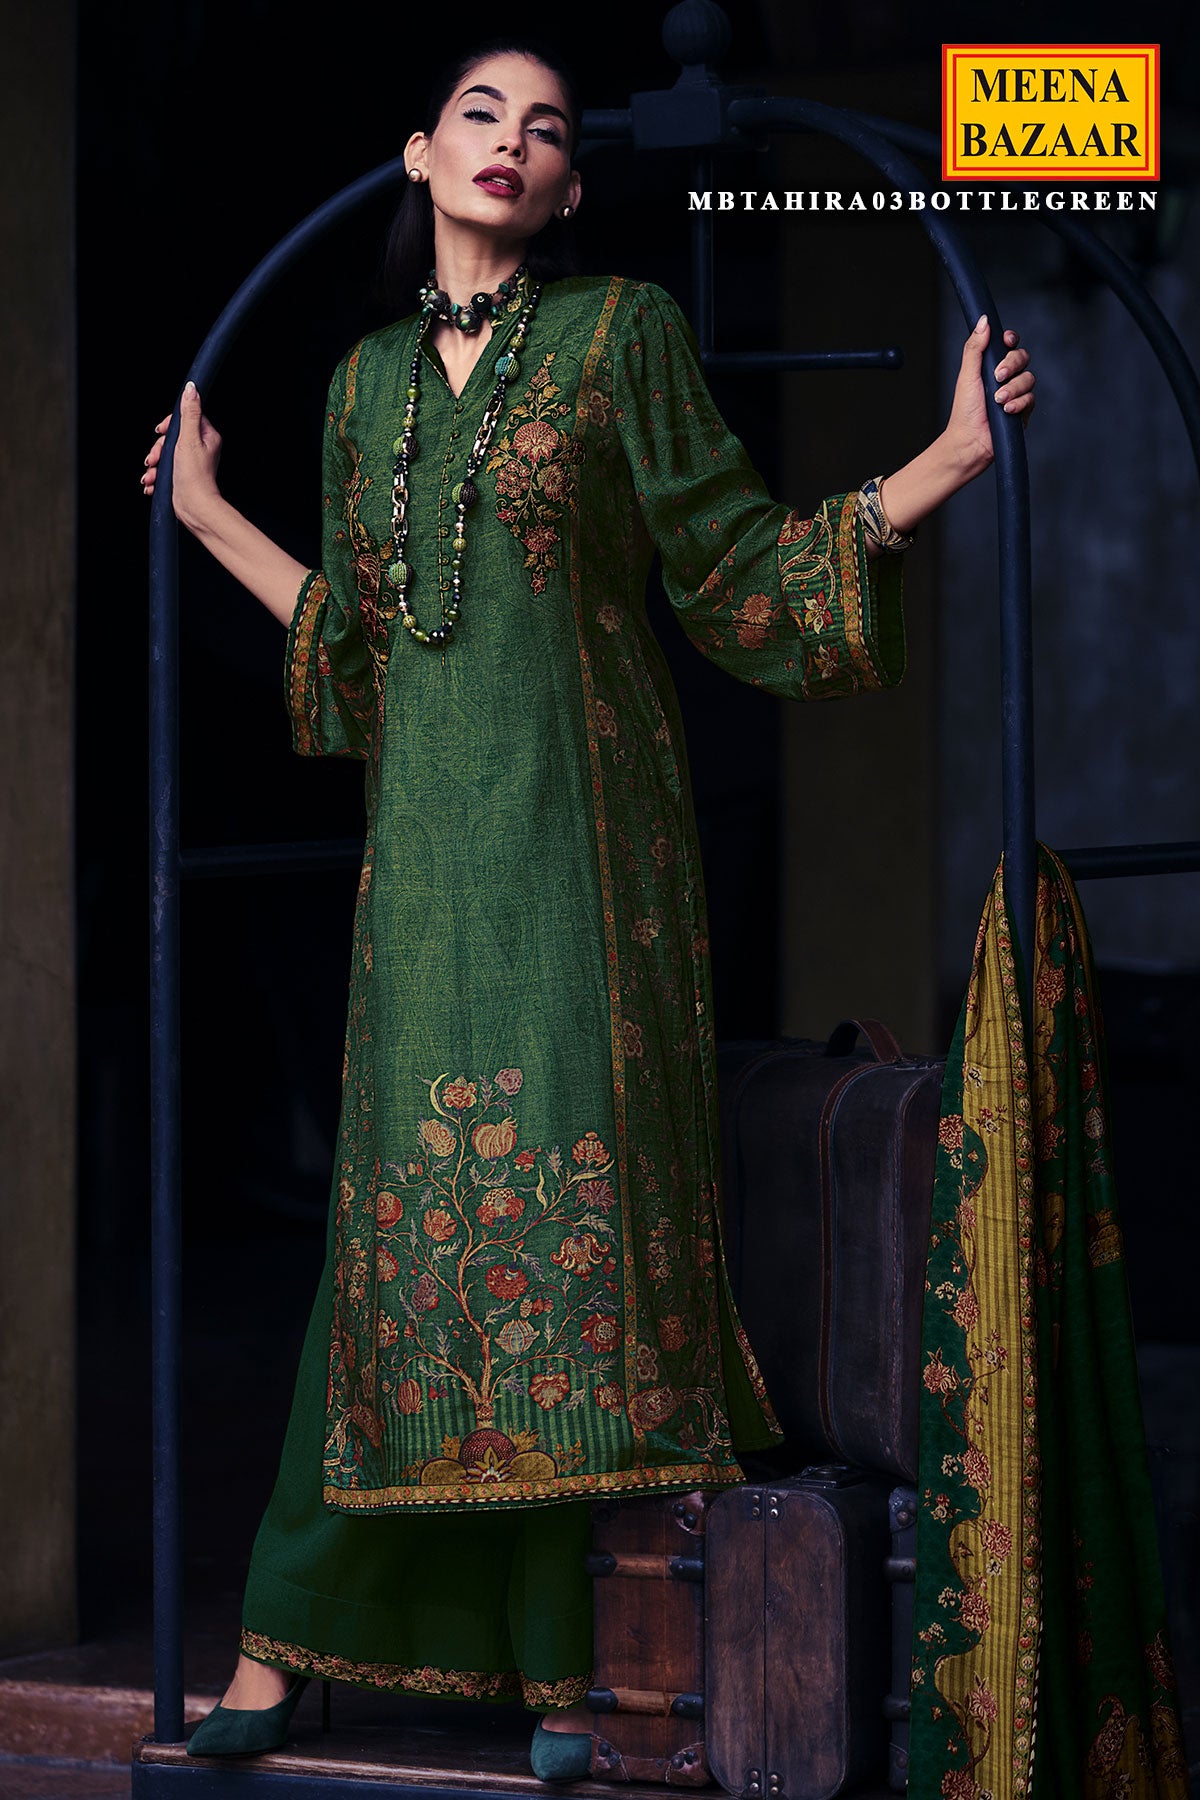 Bottle Green Blended Silk Floral Printed Floral Zari and Threadwork Embroidered Suit Set